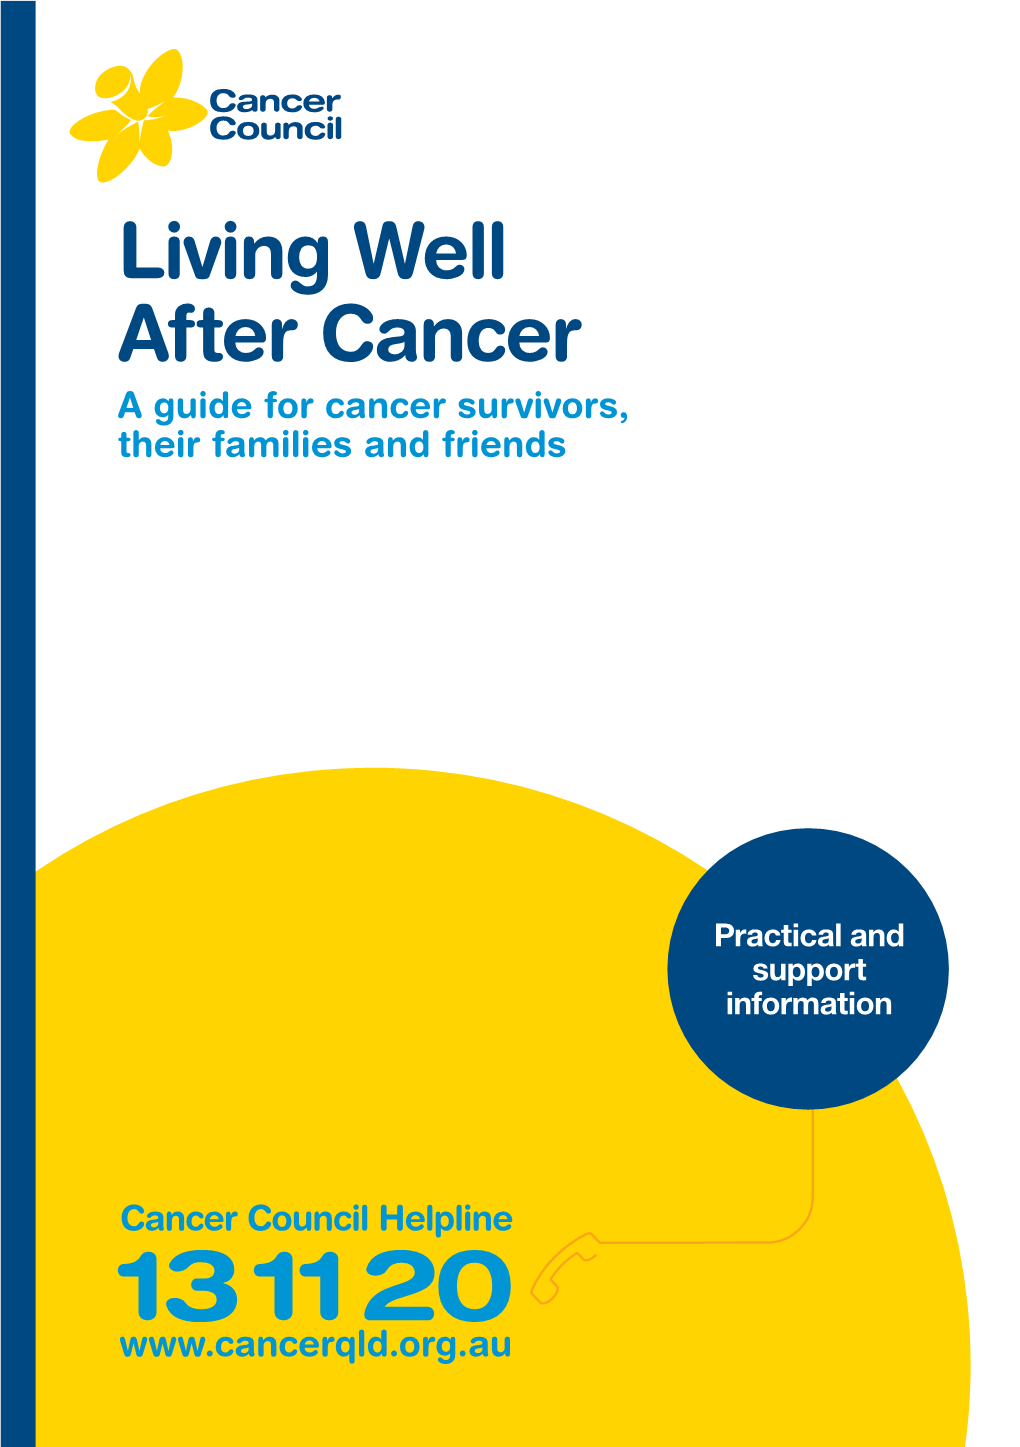 Living Well After Cancer a Guide for Cancer Survivors, Their Families and Friends